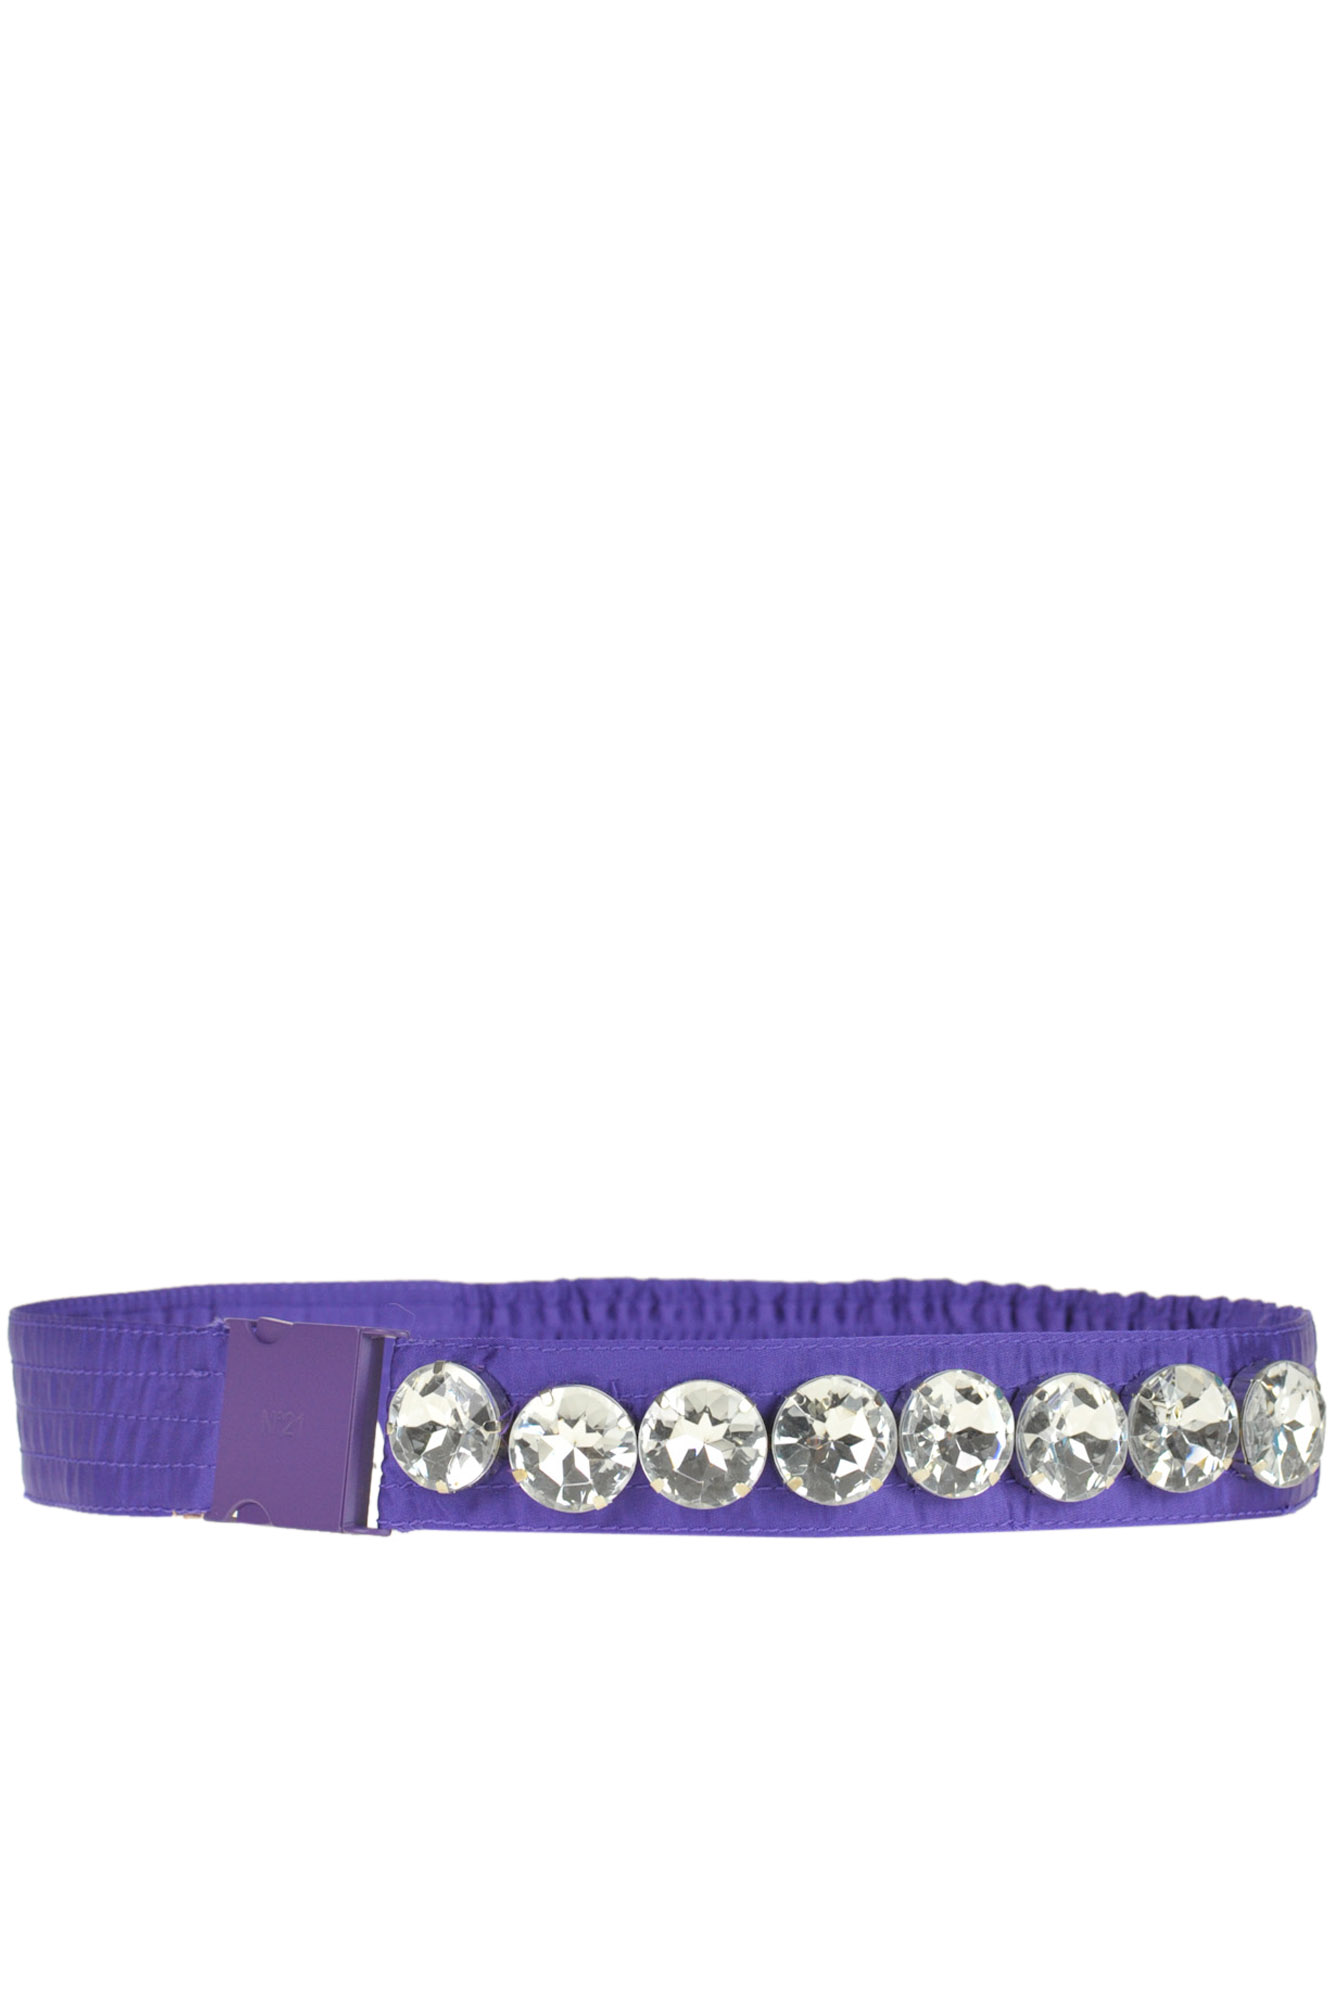 N°21 Embellished Fabric Waistbelt With Maxi Strass In Purple